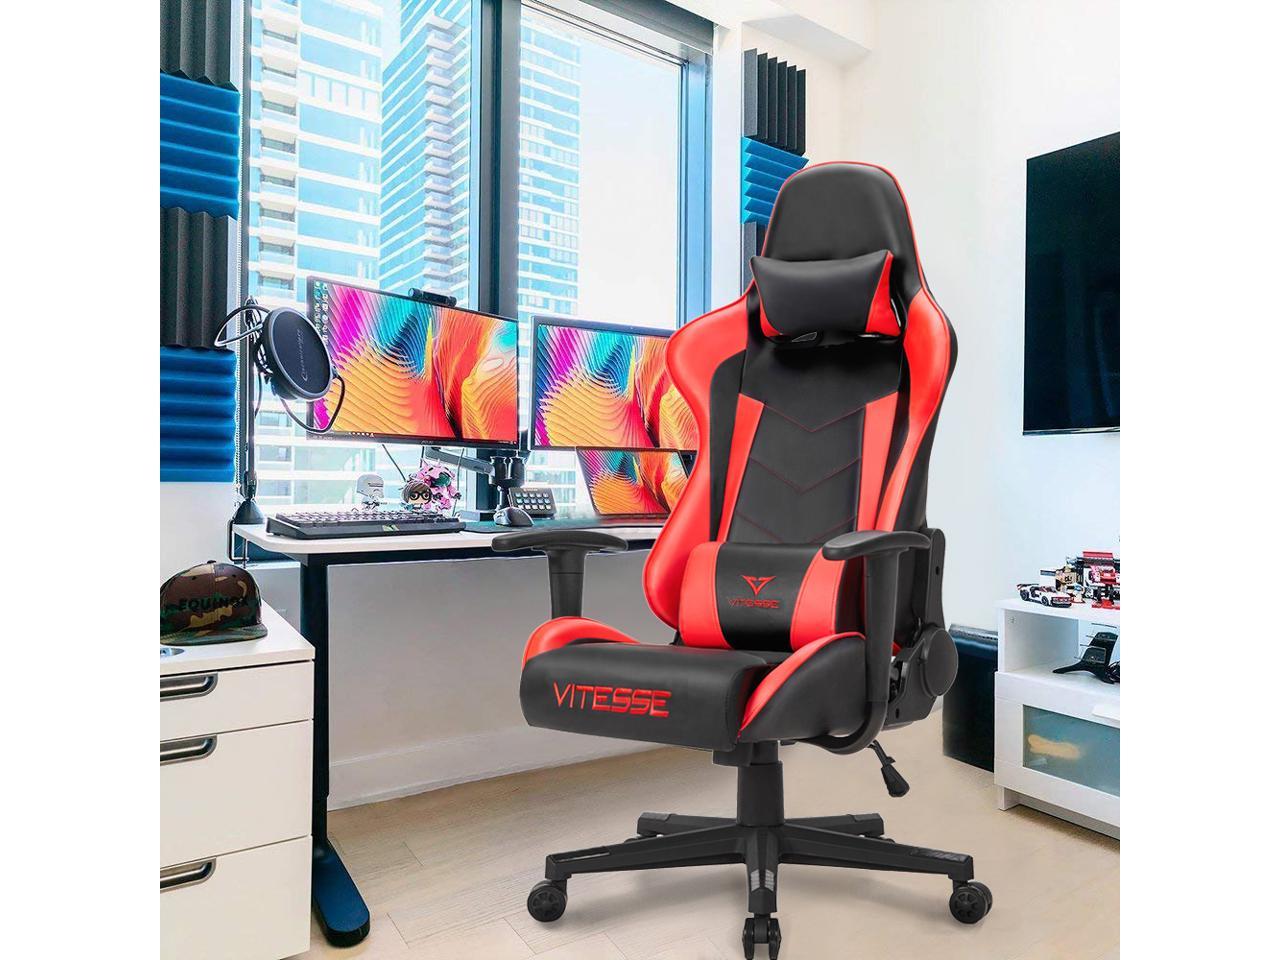 When you’re trying to play games and keep an online audience entertained for multiple hours at a time, you want to make sure that whatever you’re sitting on is comfortable, and that’s where gaming chairs come in.